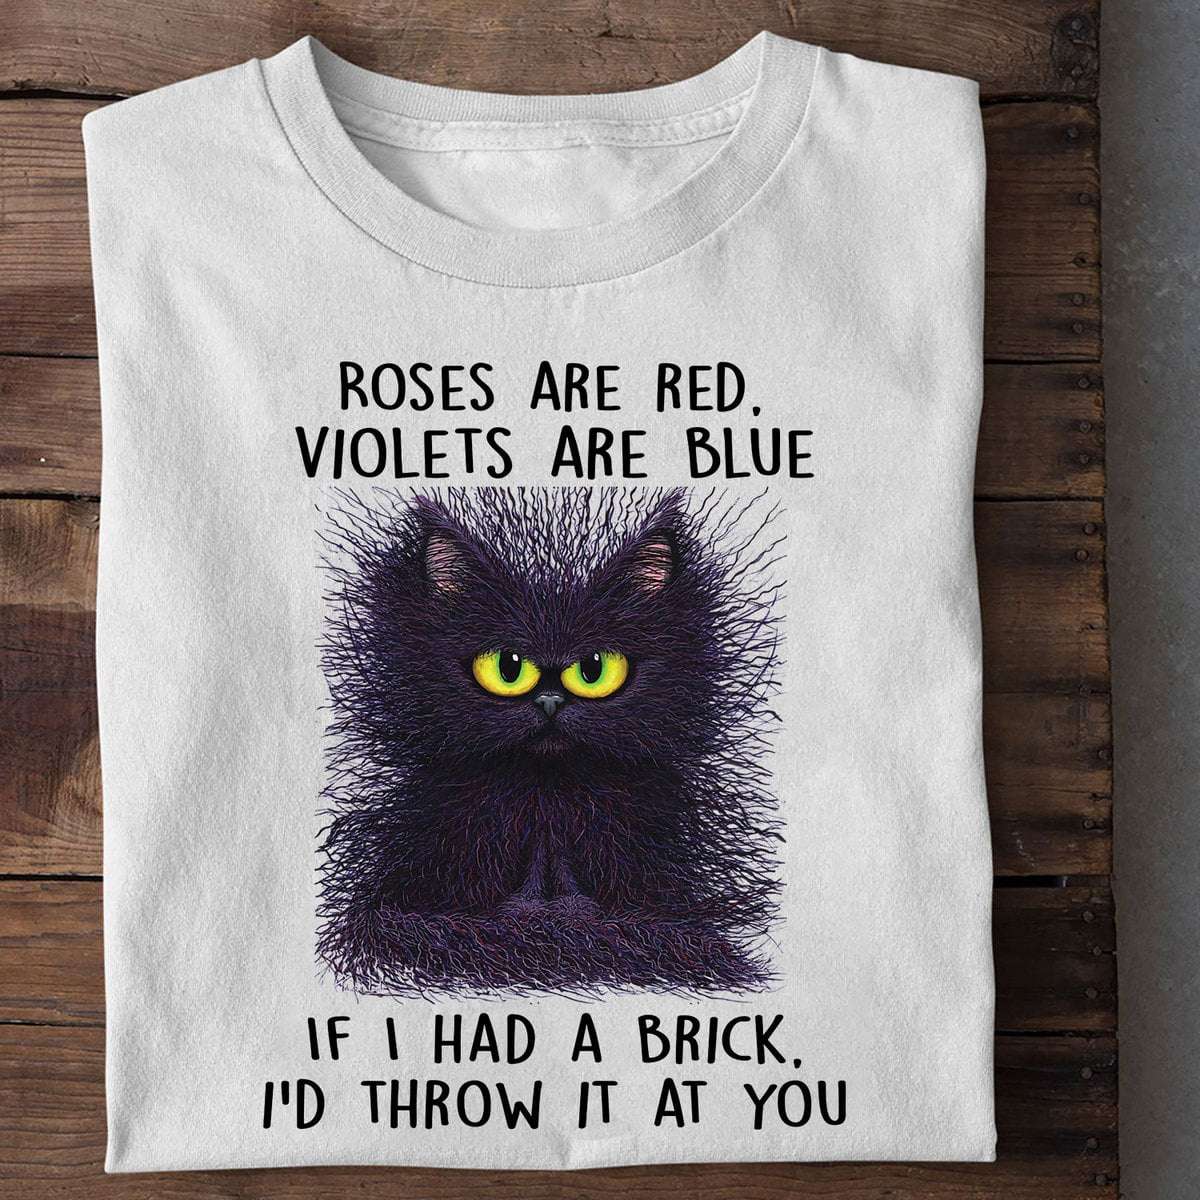 Ruffled Black Cat - Roses are red violets are blue if i had a brick i'd throw it at you